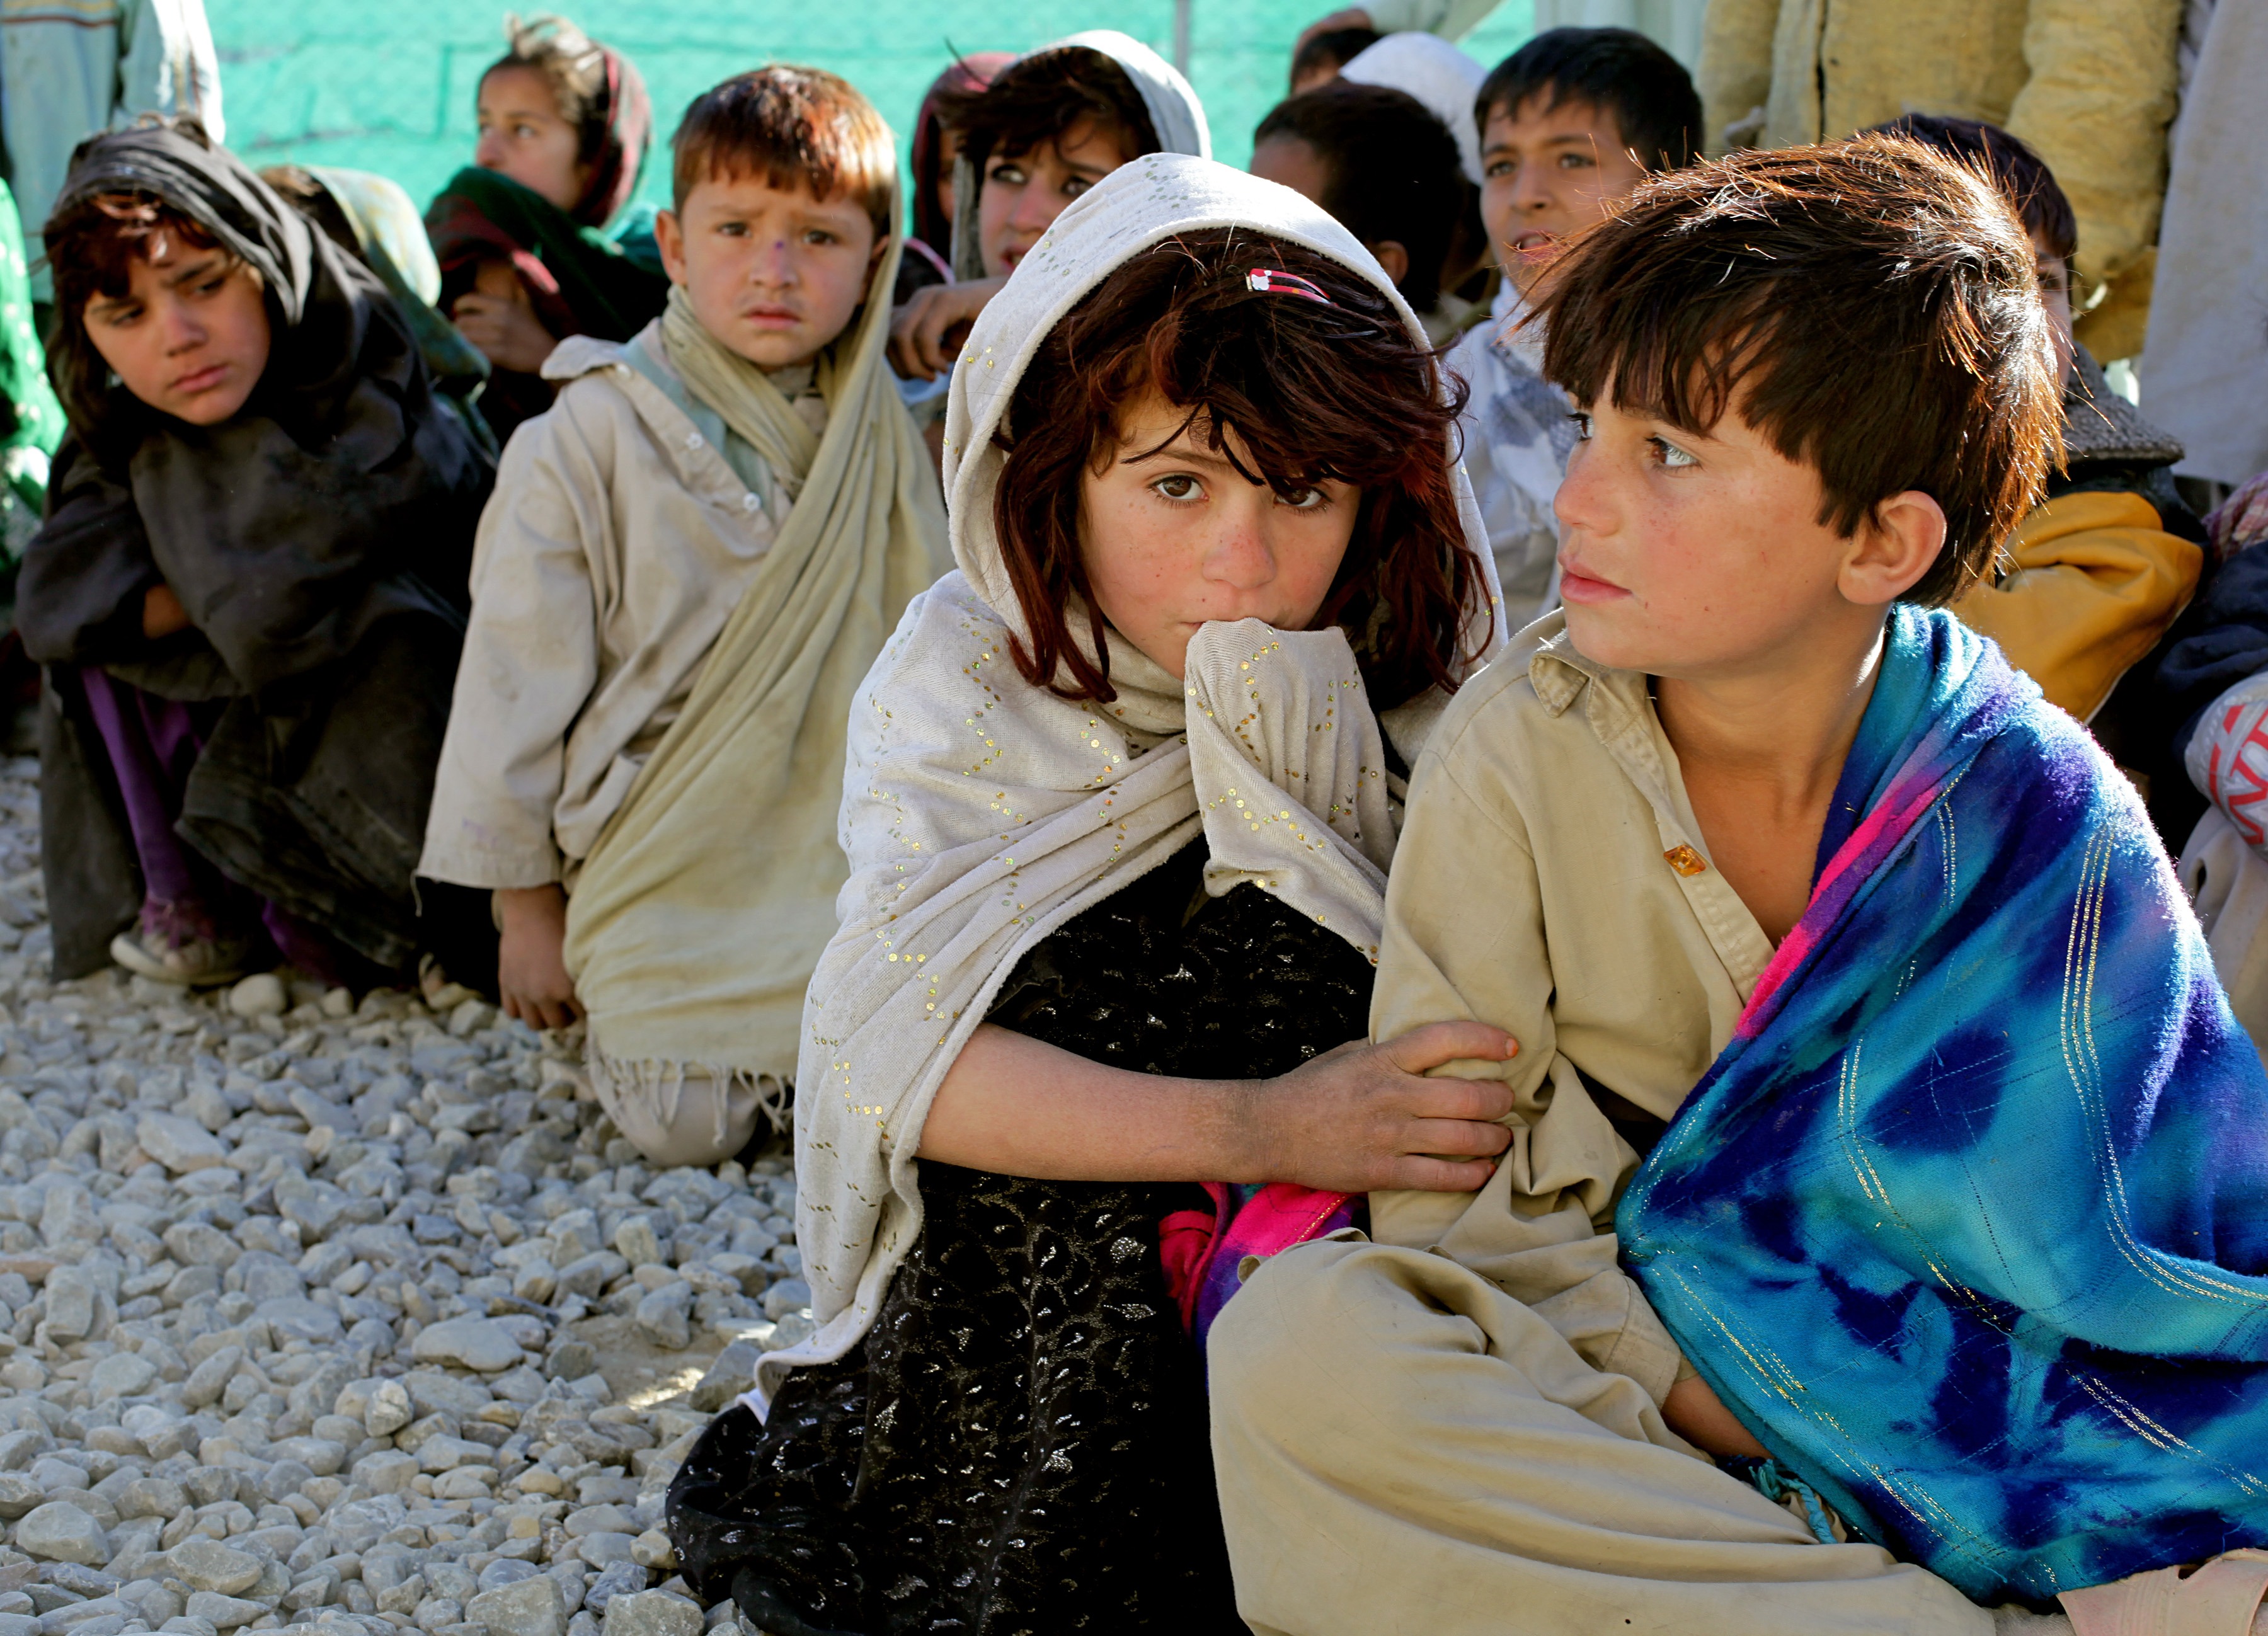 Free Image, person, people, girl, boy, child, children, poverty, afghanistan, afghani 3600x2597